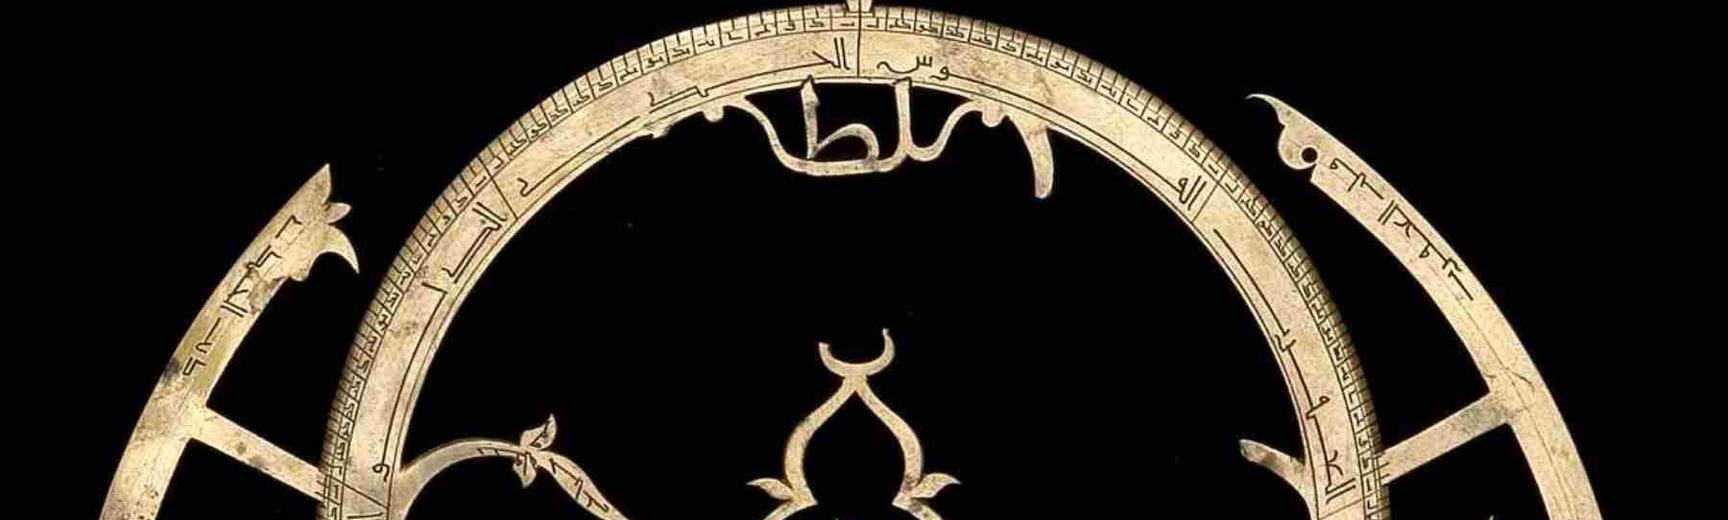 37148 Astrolabe with Lunar Mansions, by Abd al-Karim, Jazira (Mesopotamia)?, 1227/8 CE Top of rete with partial 'Sultan' world in design